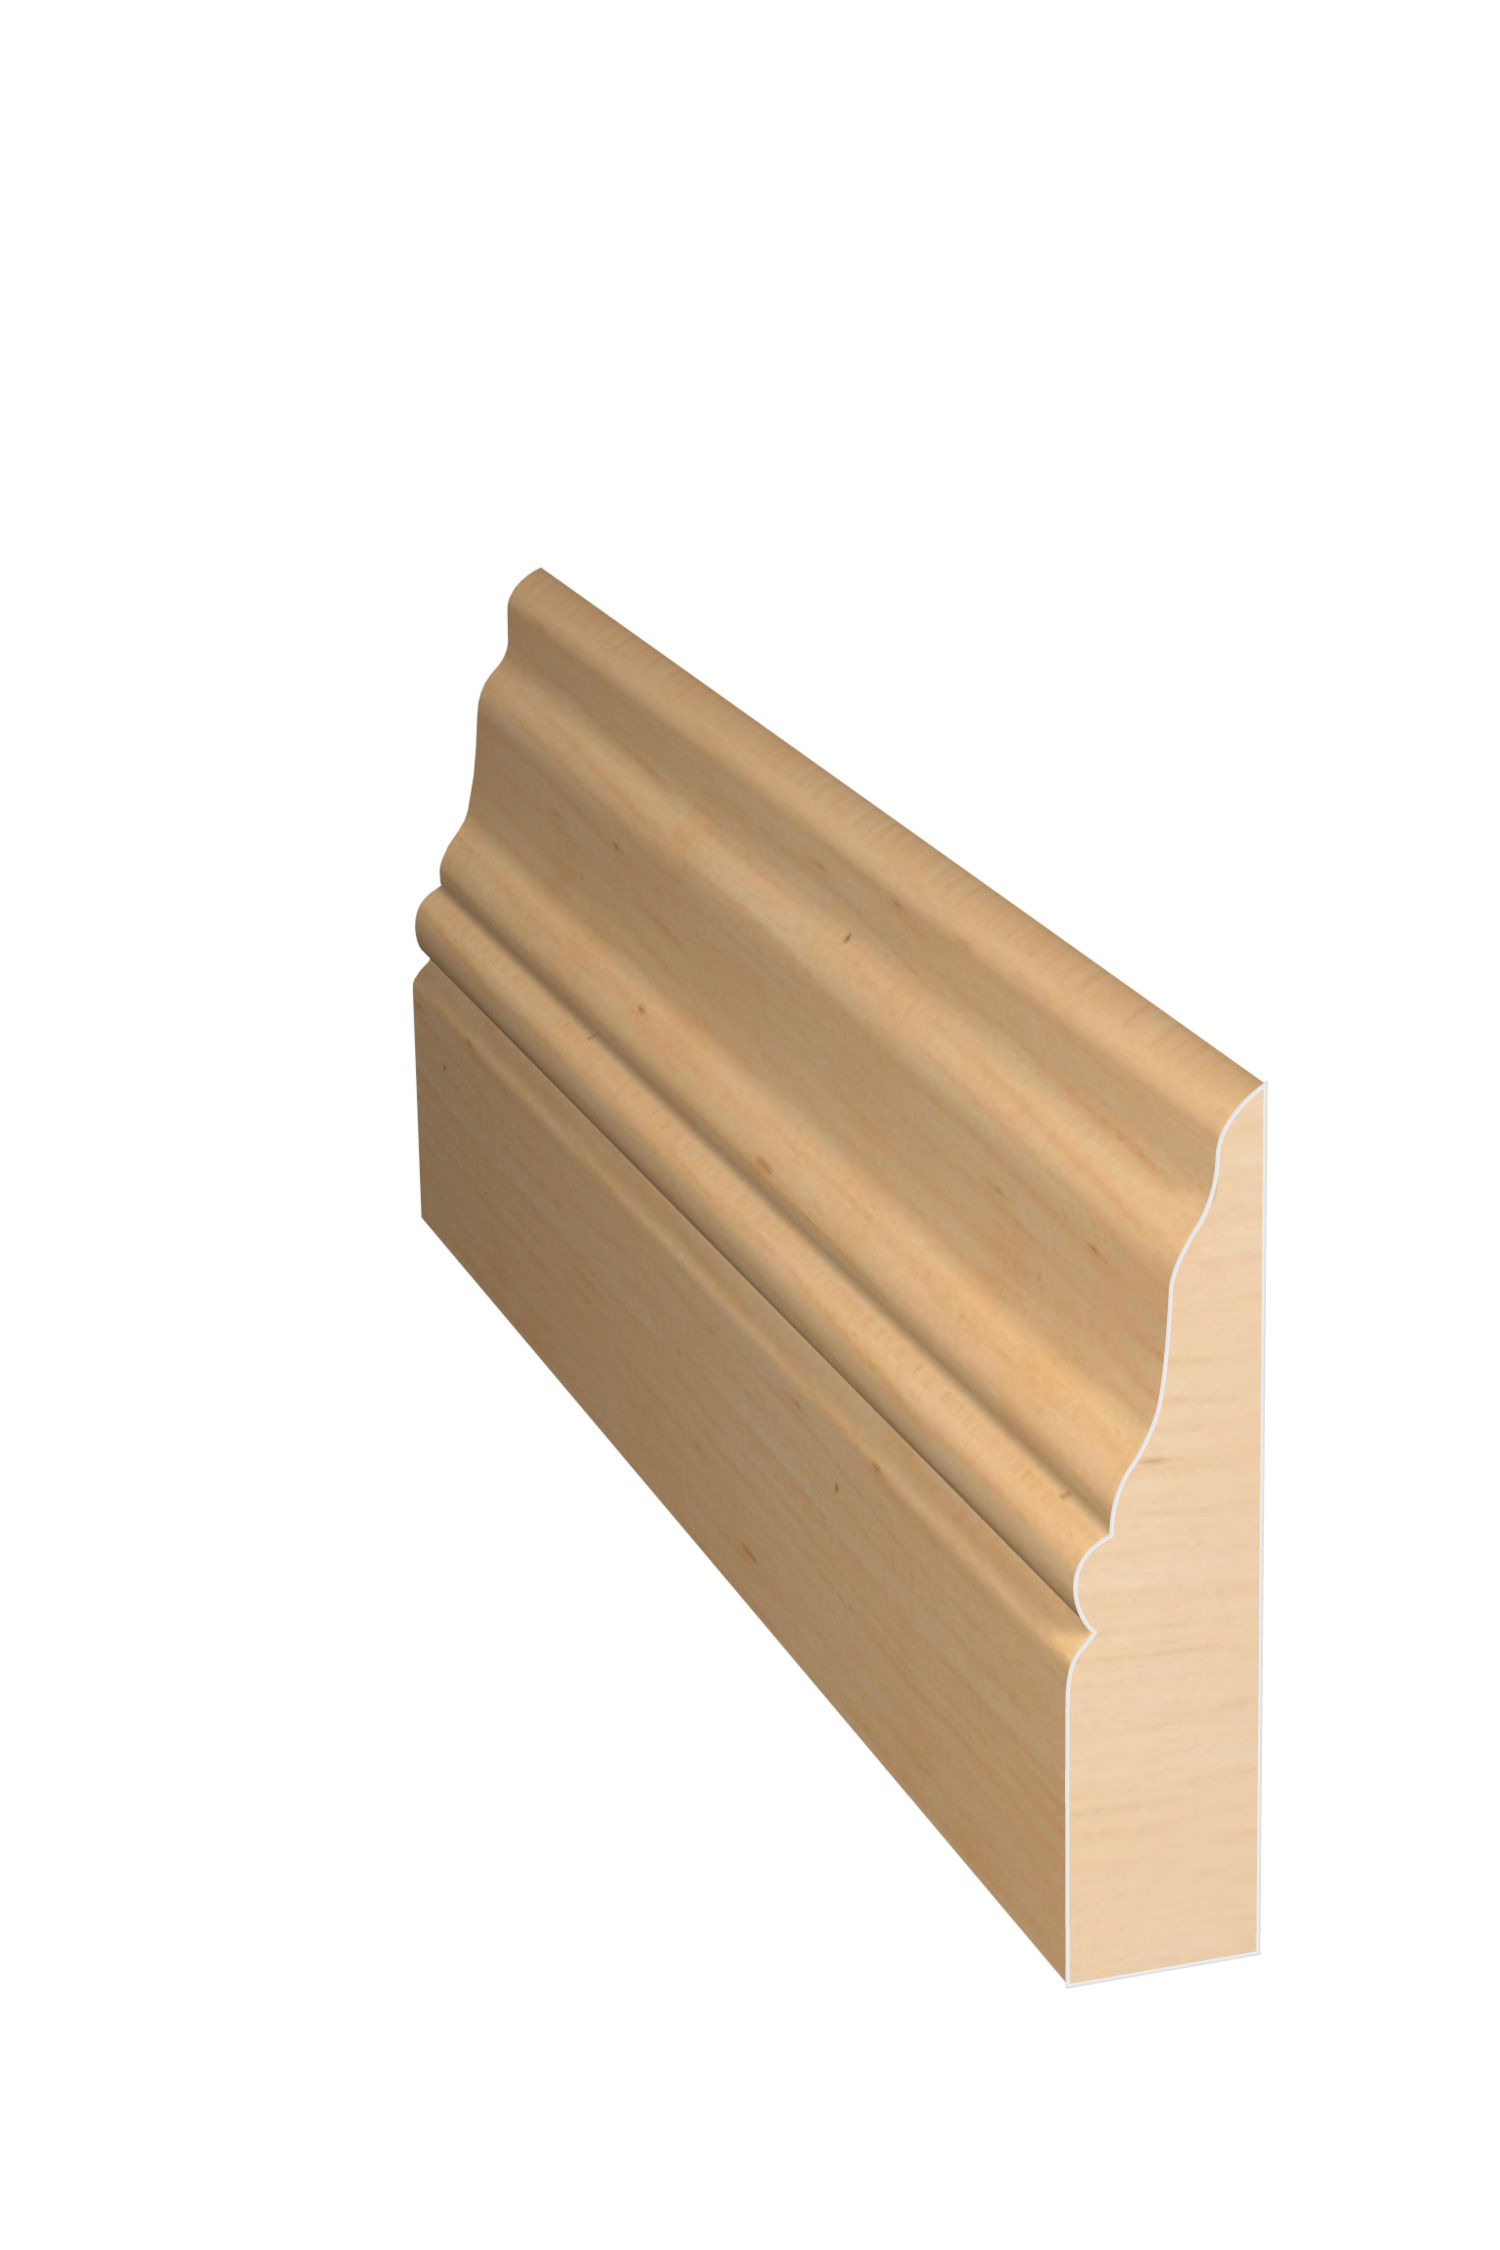 Three dimensional rendering of custom casing wood molding CAPL21410 made by Public Lumber Company in Detroit.